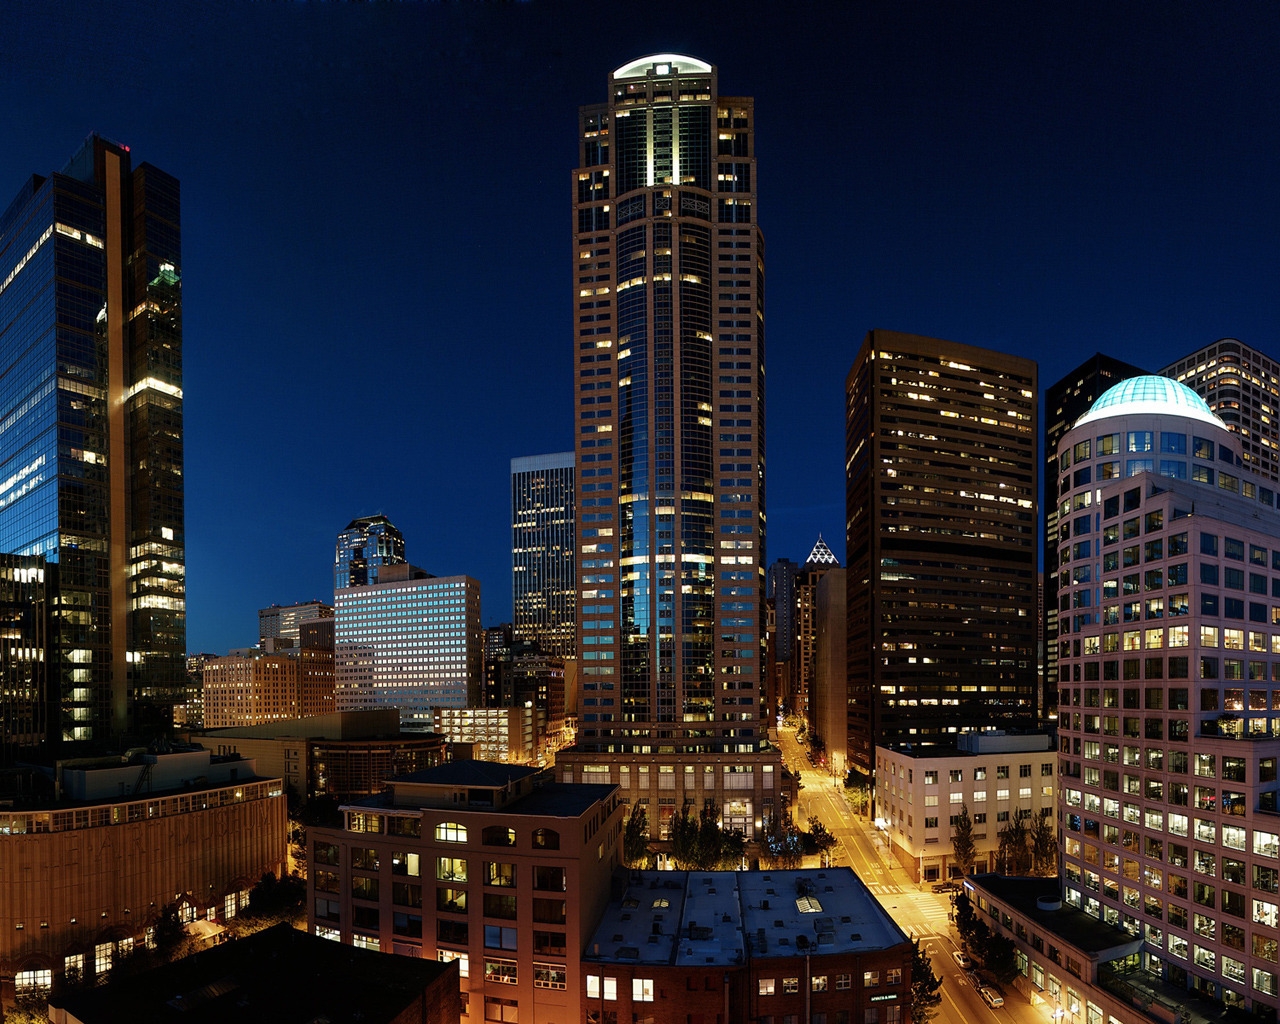 Seattle Night Lights for 1280 x 1024 resolution